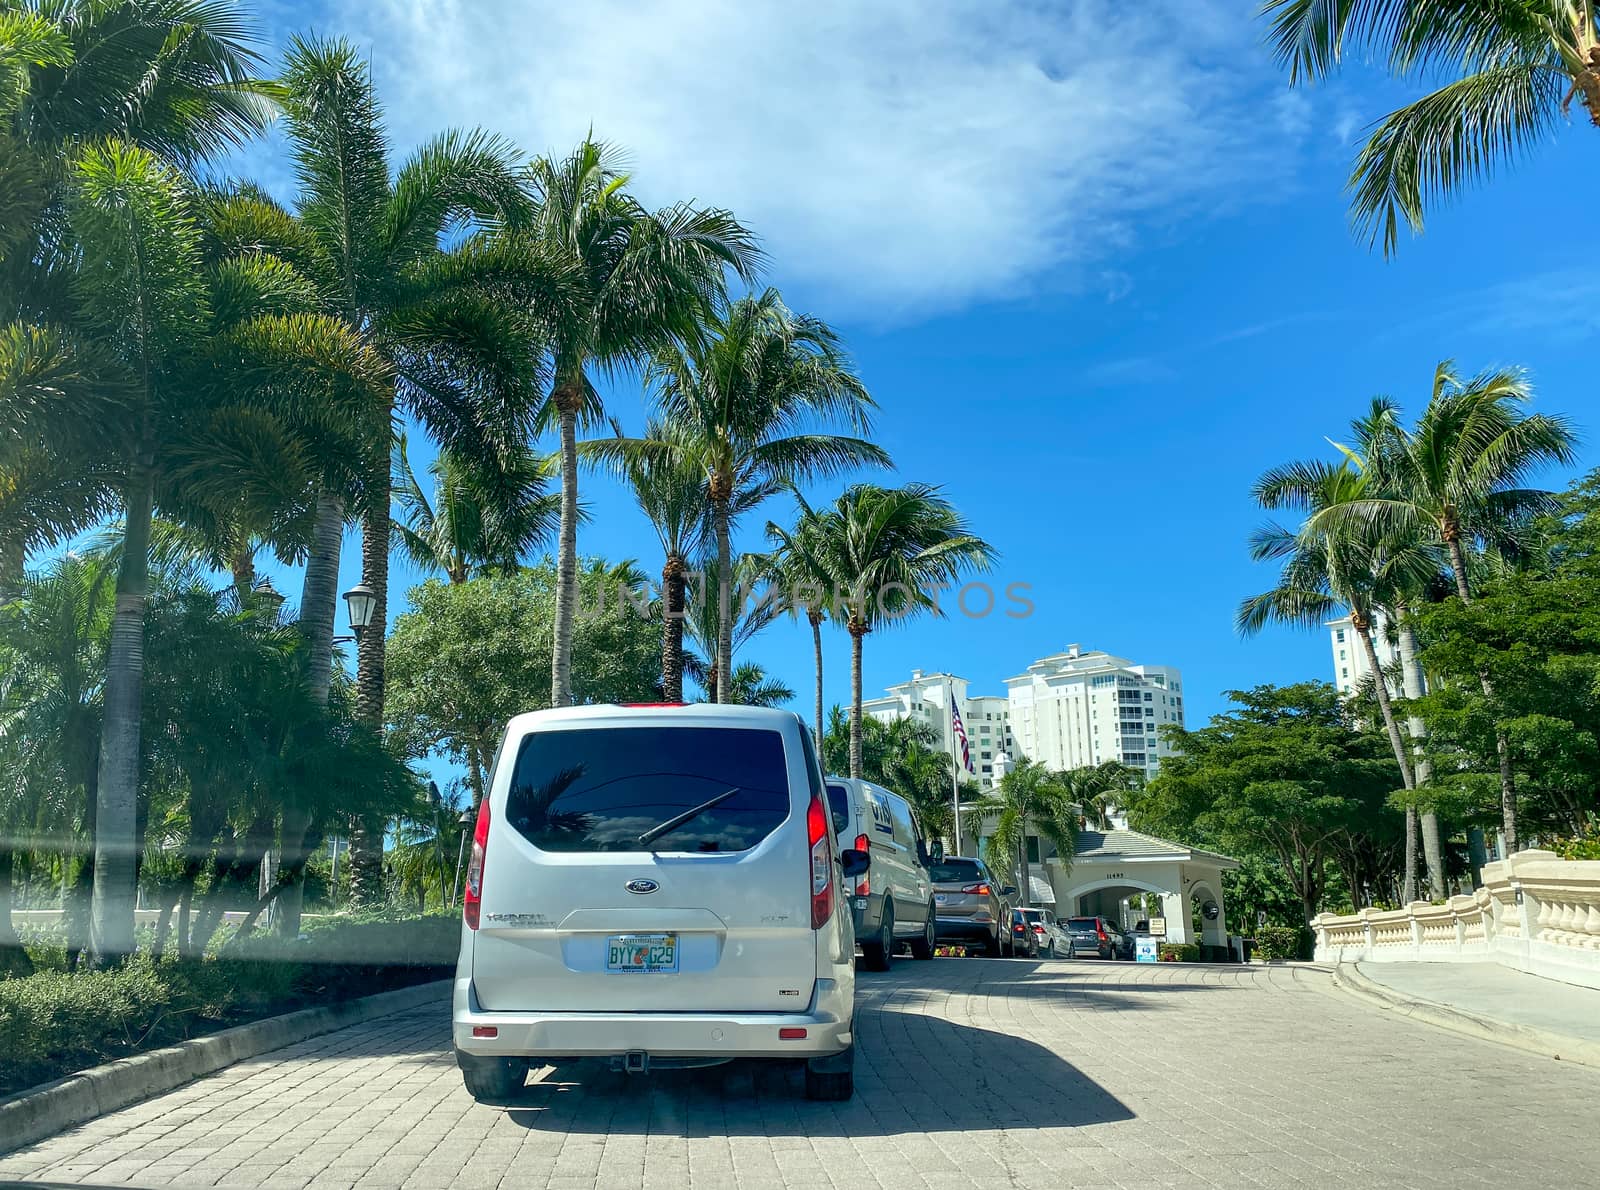 Naples, FL/USA - 10/29/20:  A line of cars waiting to check into the security guard at a luxury condominium in Naples, Florida.